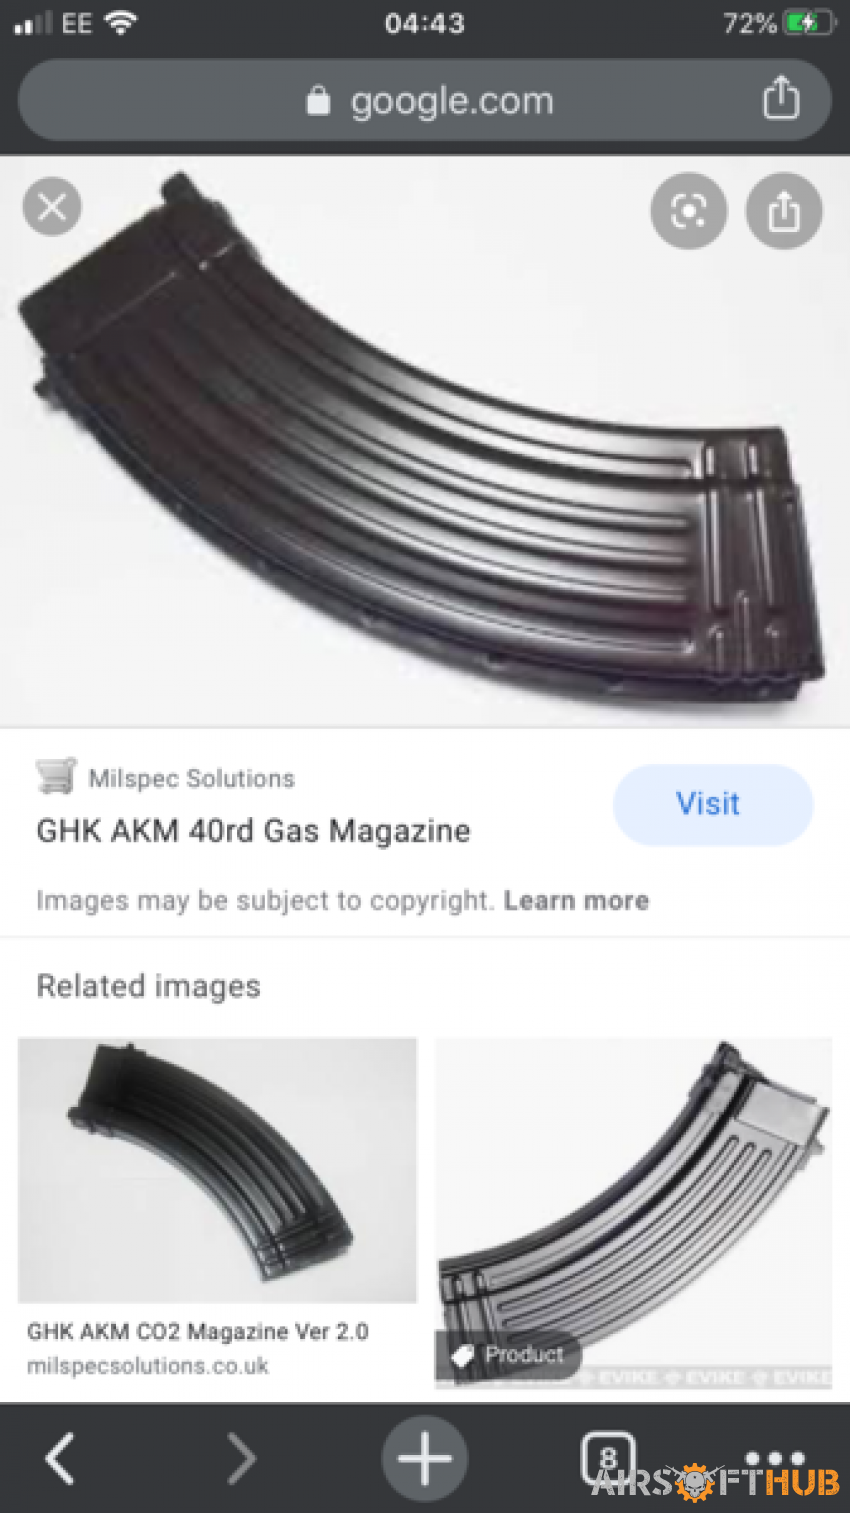 Ghk akm gas magazine wanted - Used airsoft equipment